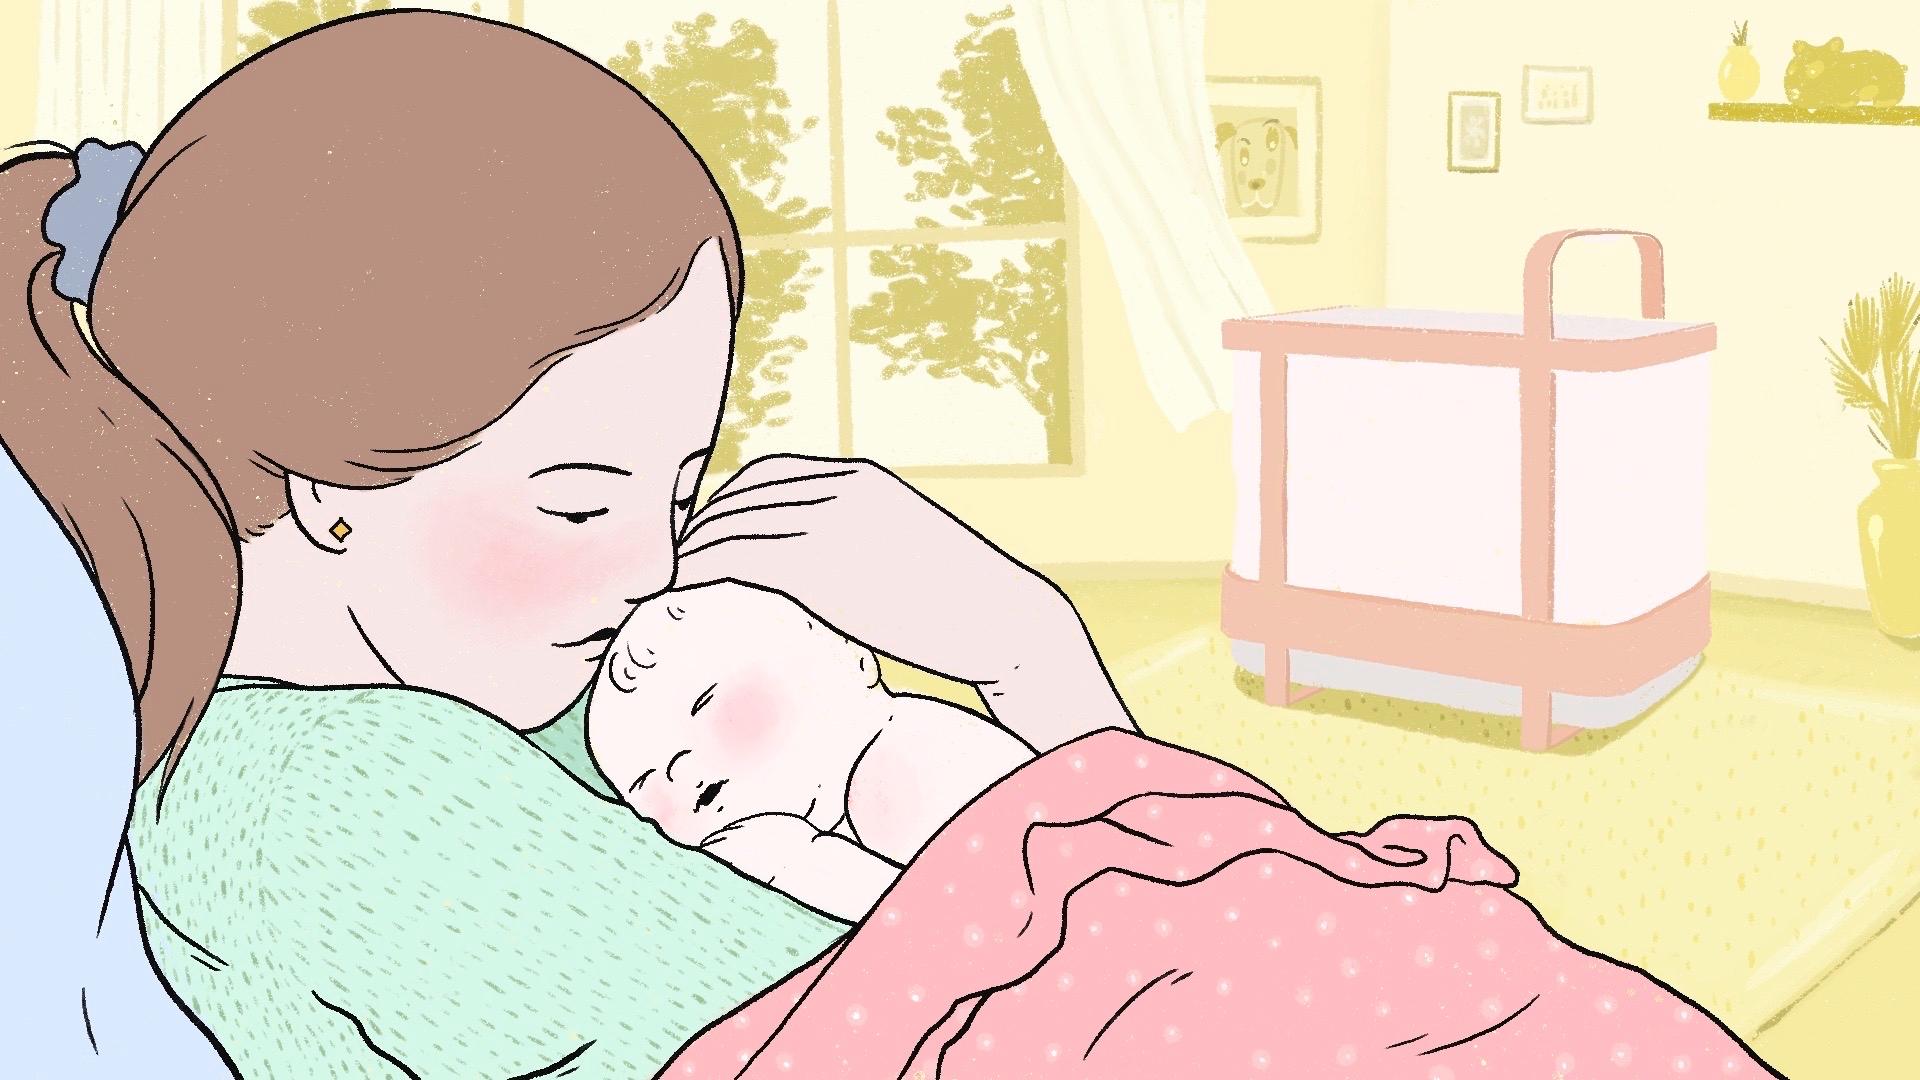 Why should you sleep with your baby’s crib sheet before making their bed? The curious link between smell and comfort